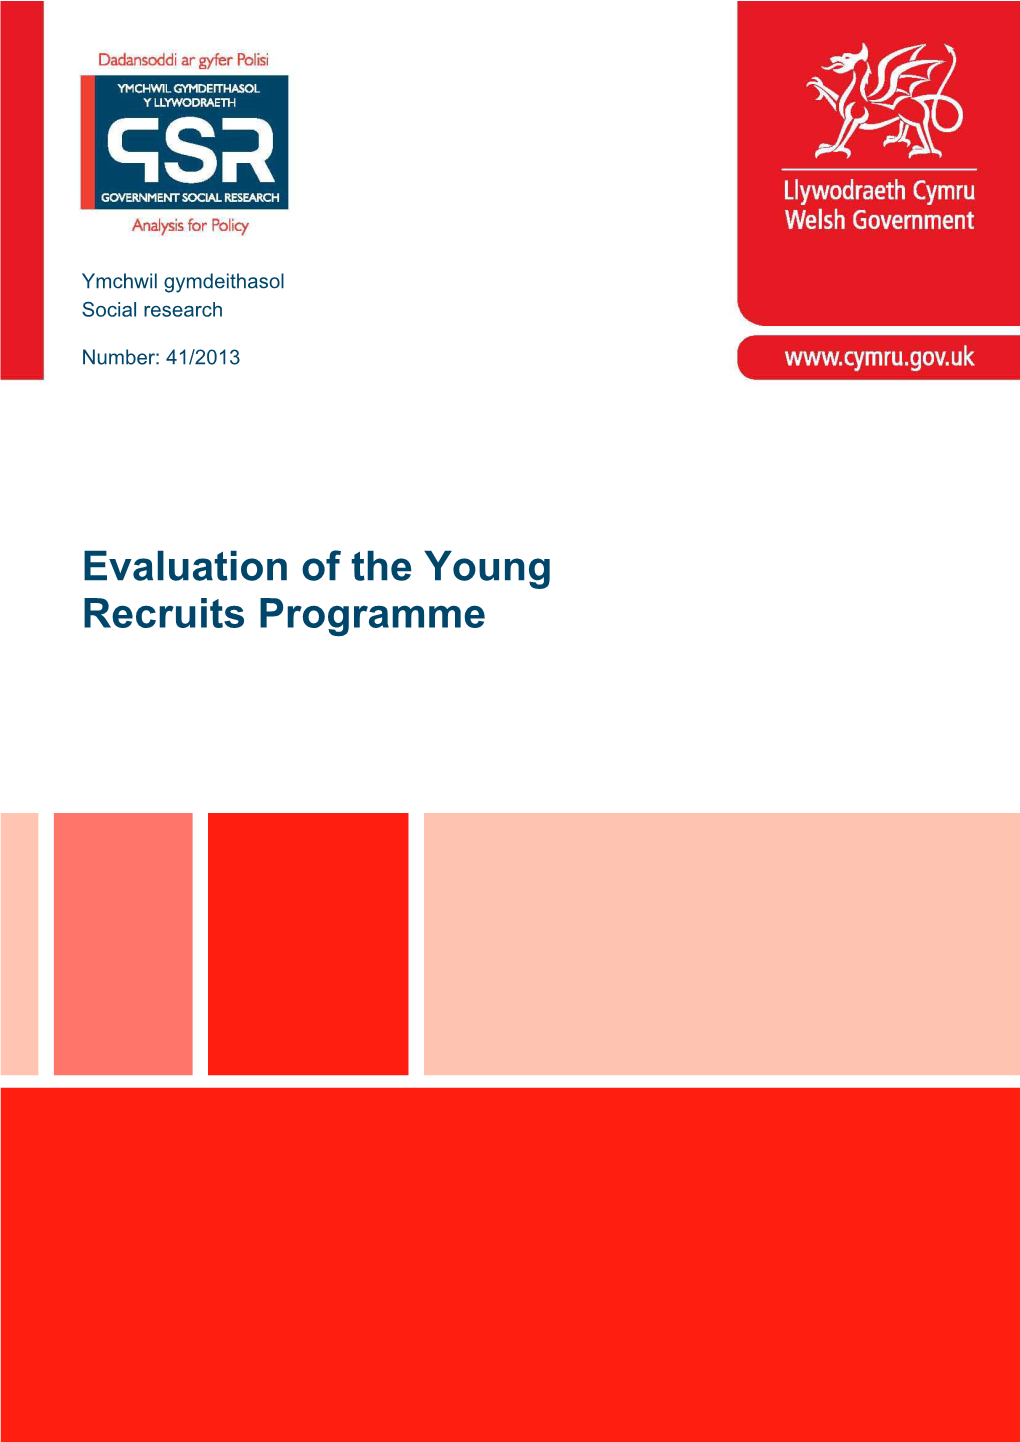 Evaluation of the Young Recruits Programme